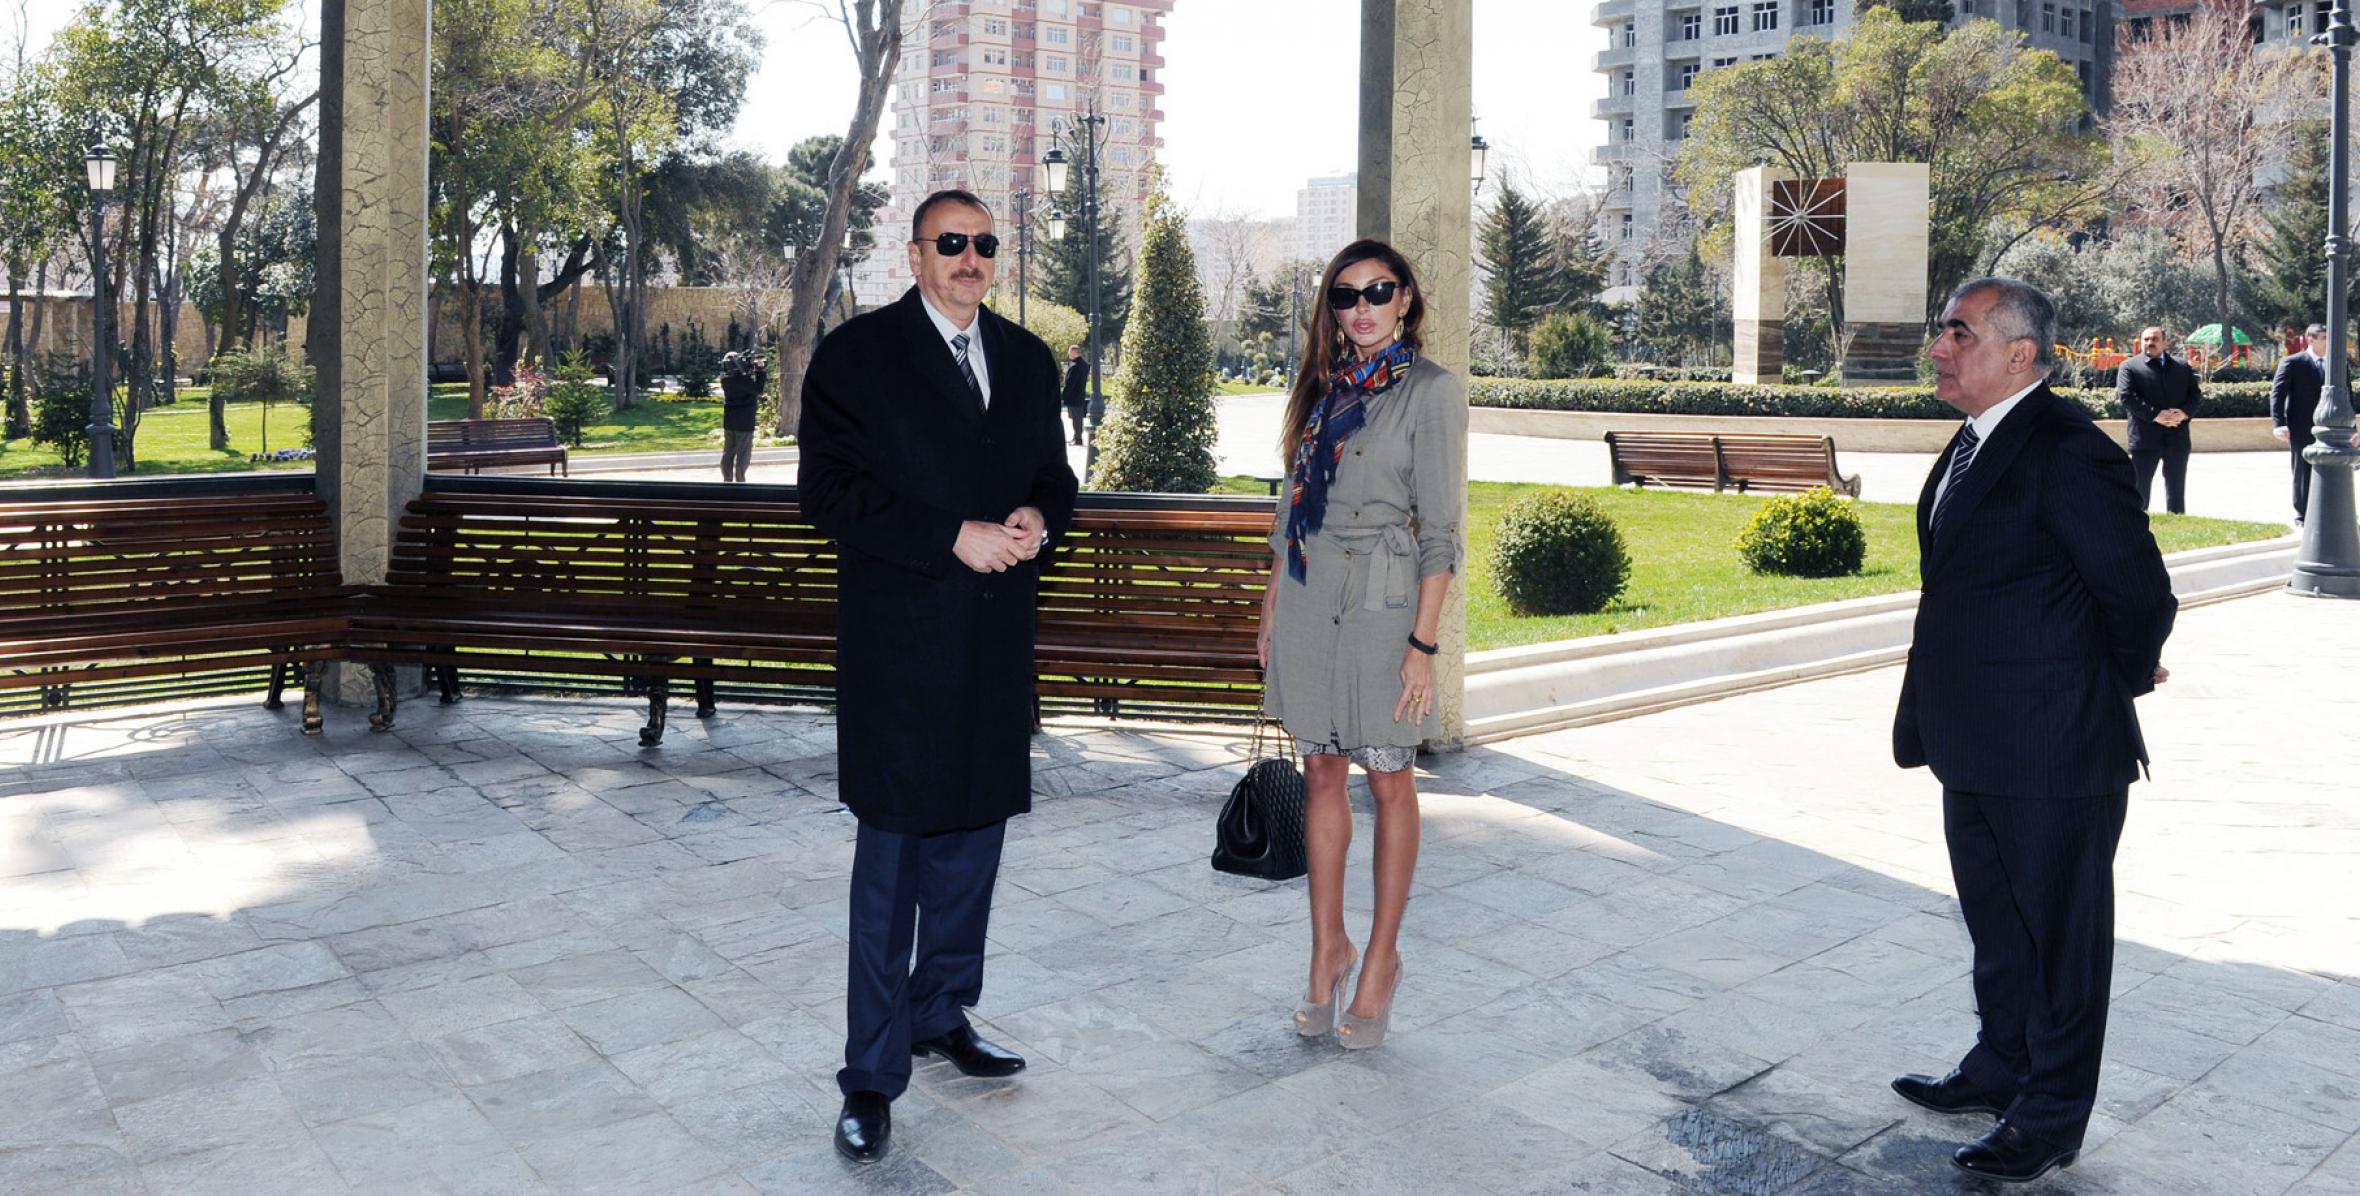 Ilham Aliyev attended the opening ceremony of the Officers’ Park in Baku